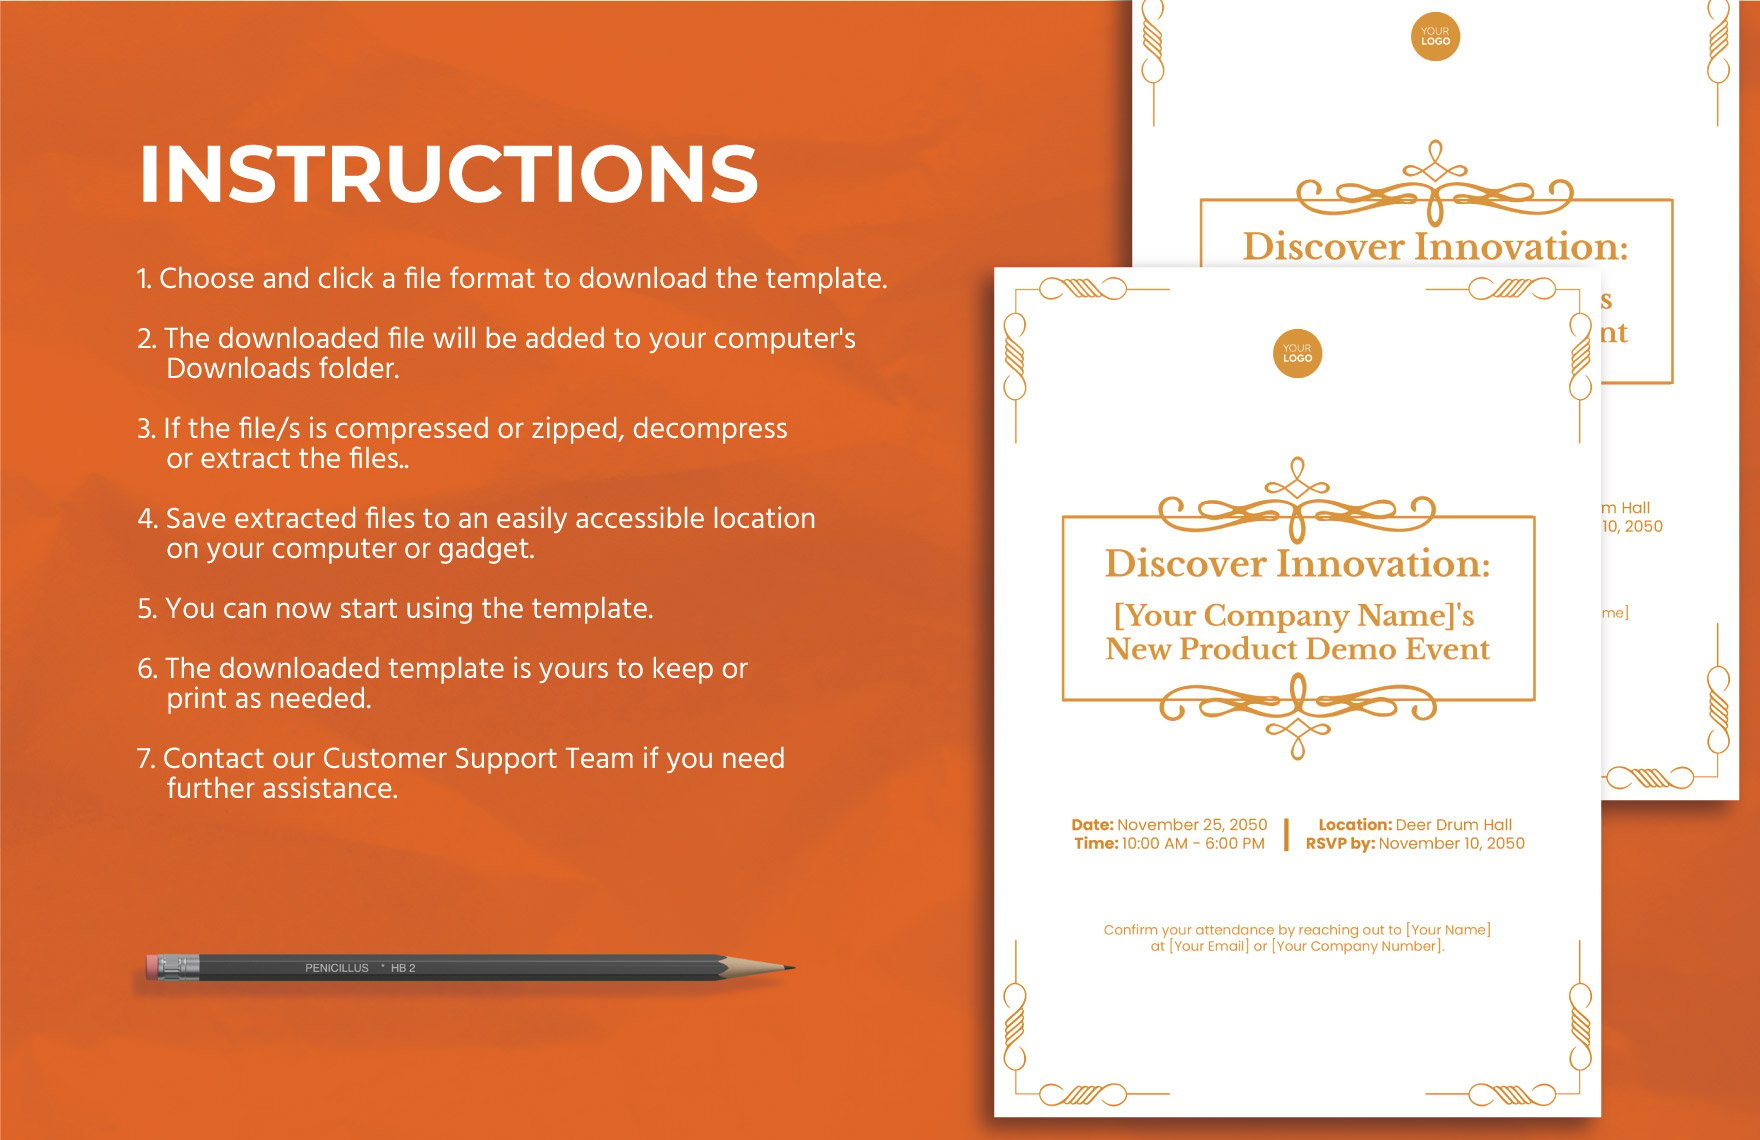 Sales New Product Demo Invitation Card Template